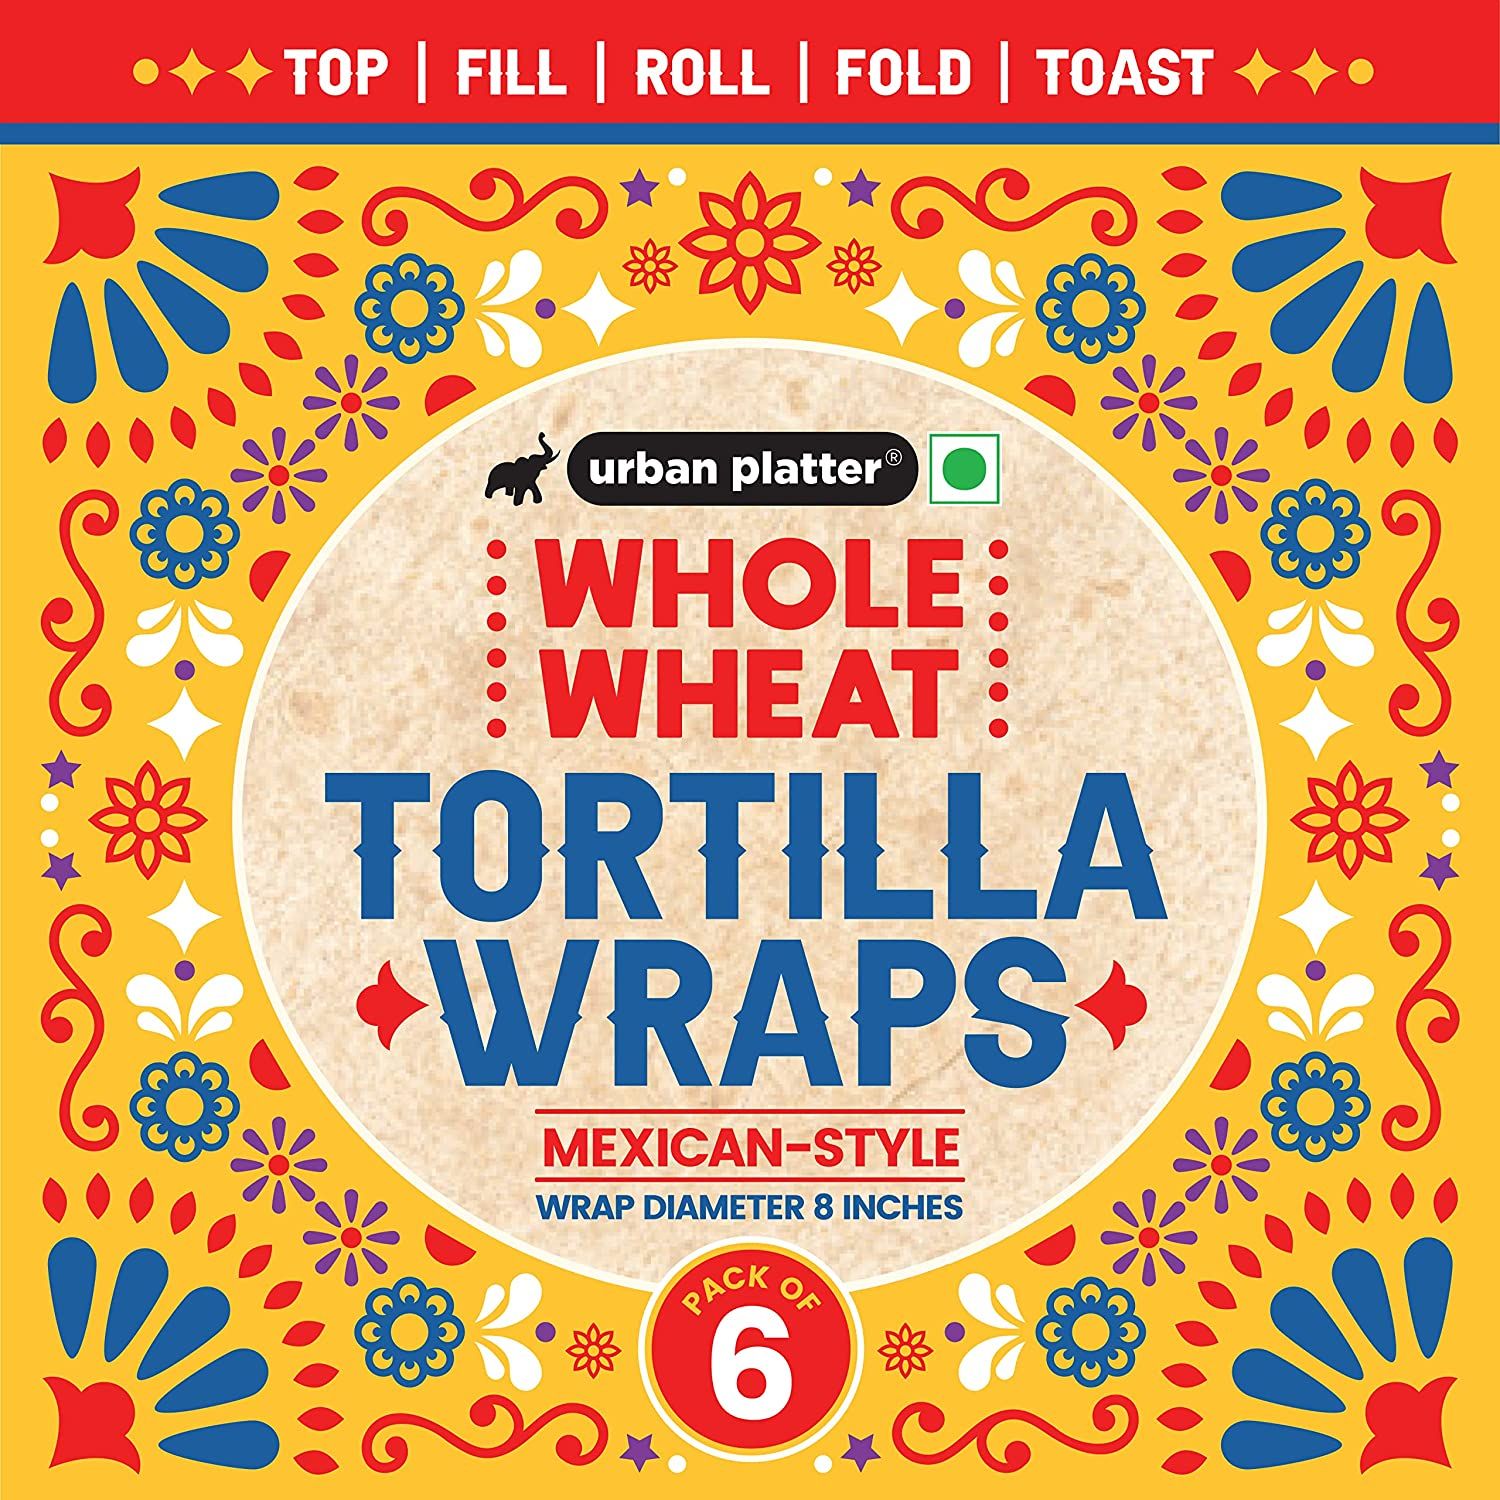 Urban Platter Whole Wheat Tortilla Wraps, 270g (Pack of 6 | 8 Inches Diameter | Mexican style | Roll up in a Burrito, Fold into a Wrap, Use it for Quesadilla)